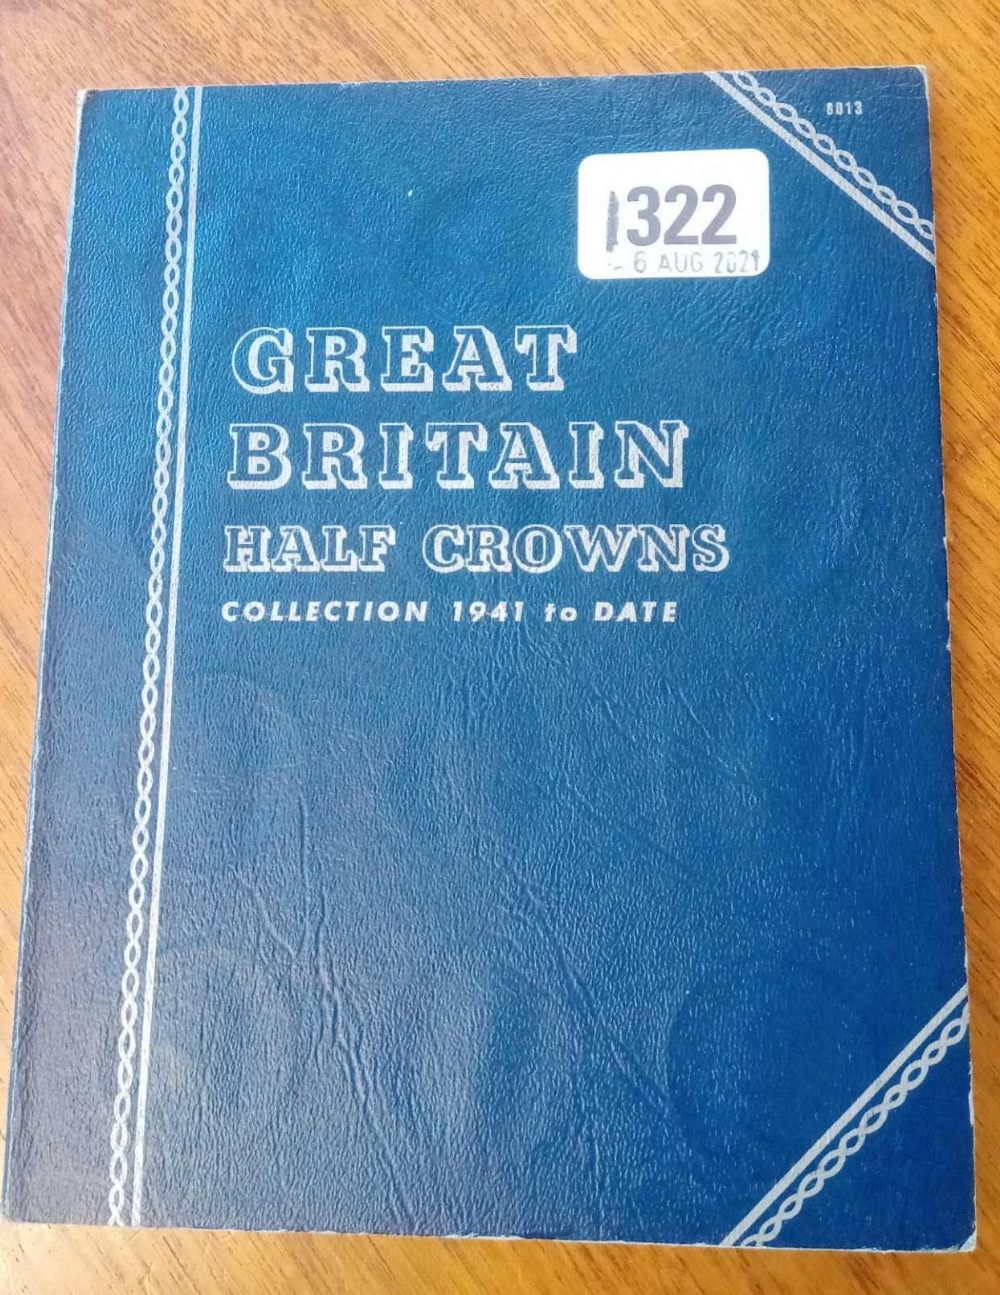 Great Britain half-crowns Whitman folder 1941-1967 (not complete) - Image 2 of 2